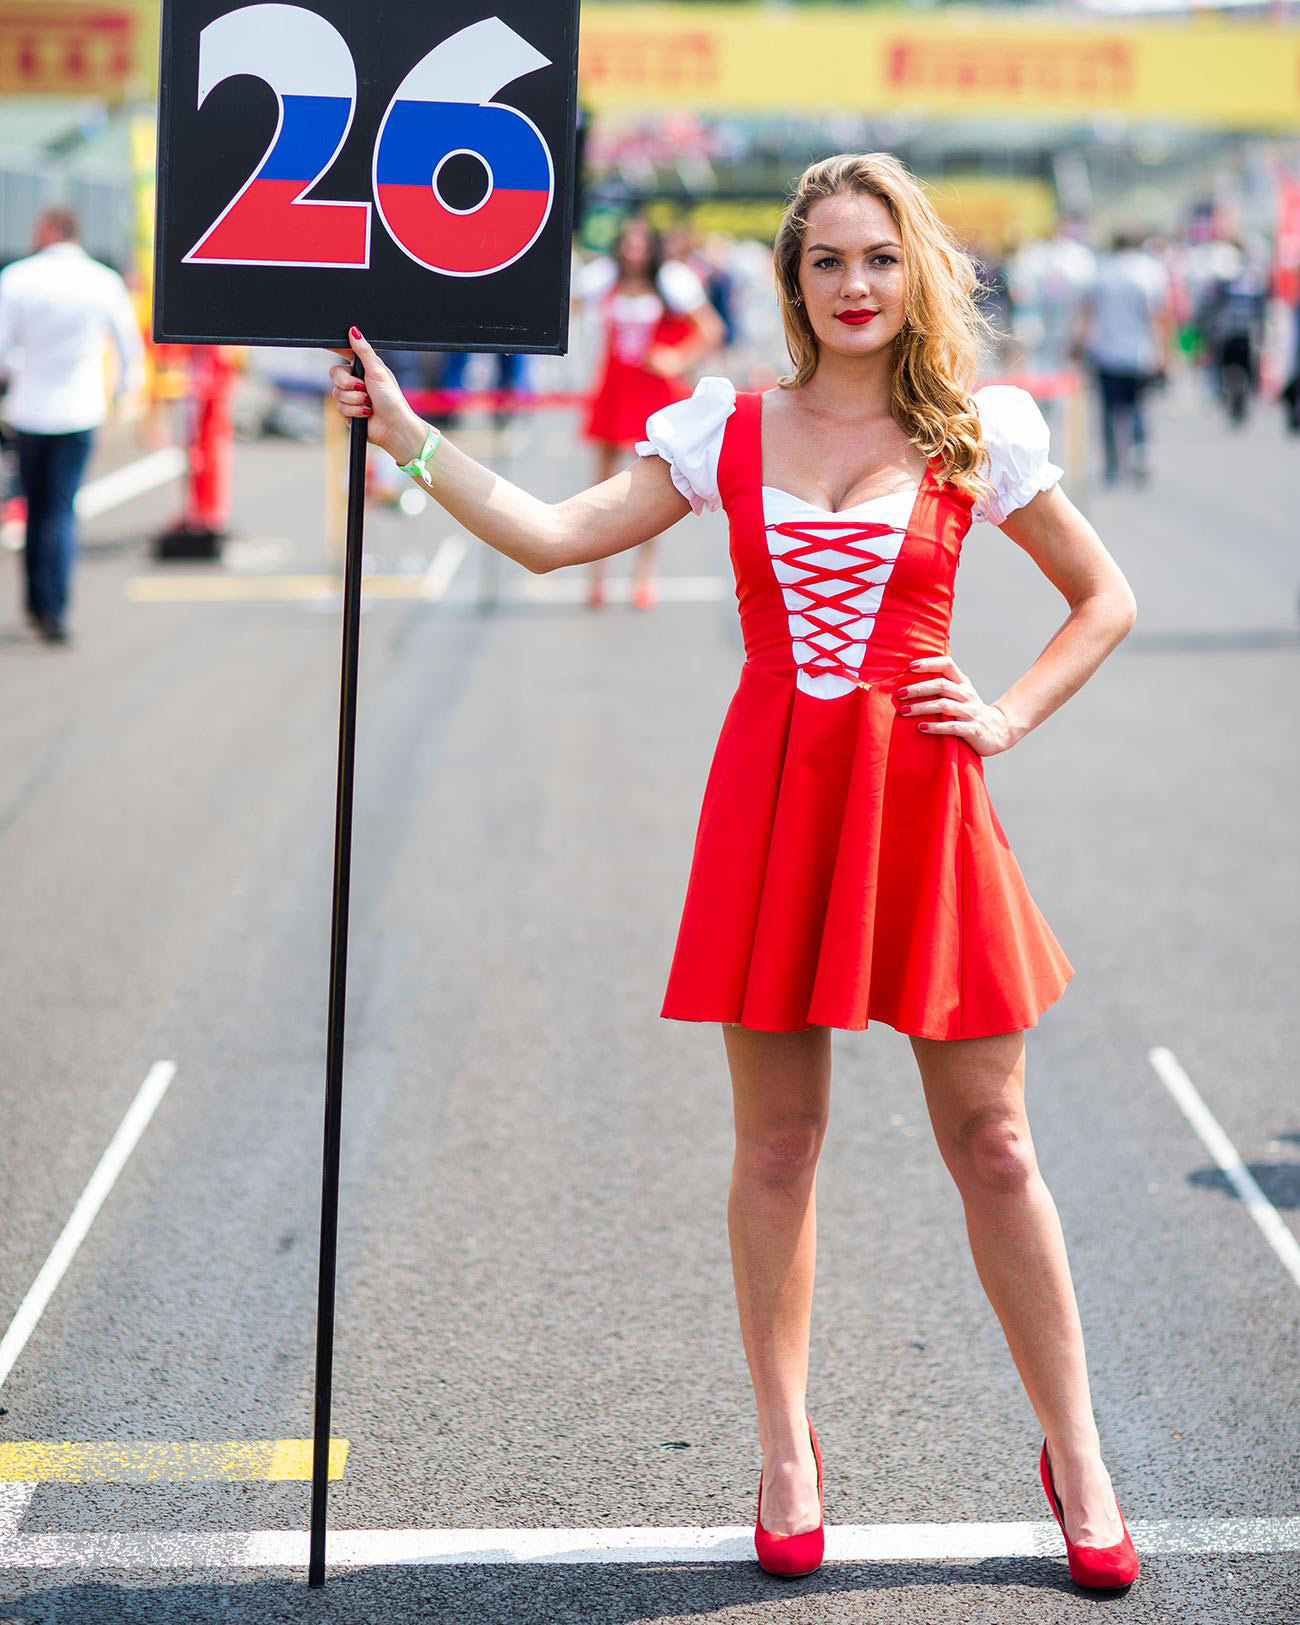 Sign of the times: a grid girl at the Hungarian Grand Prix two years ago